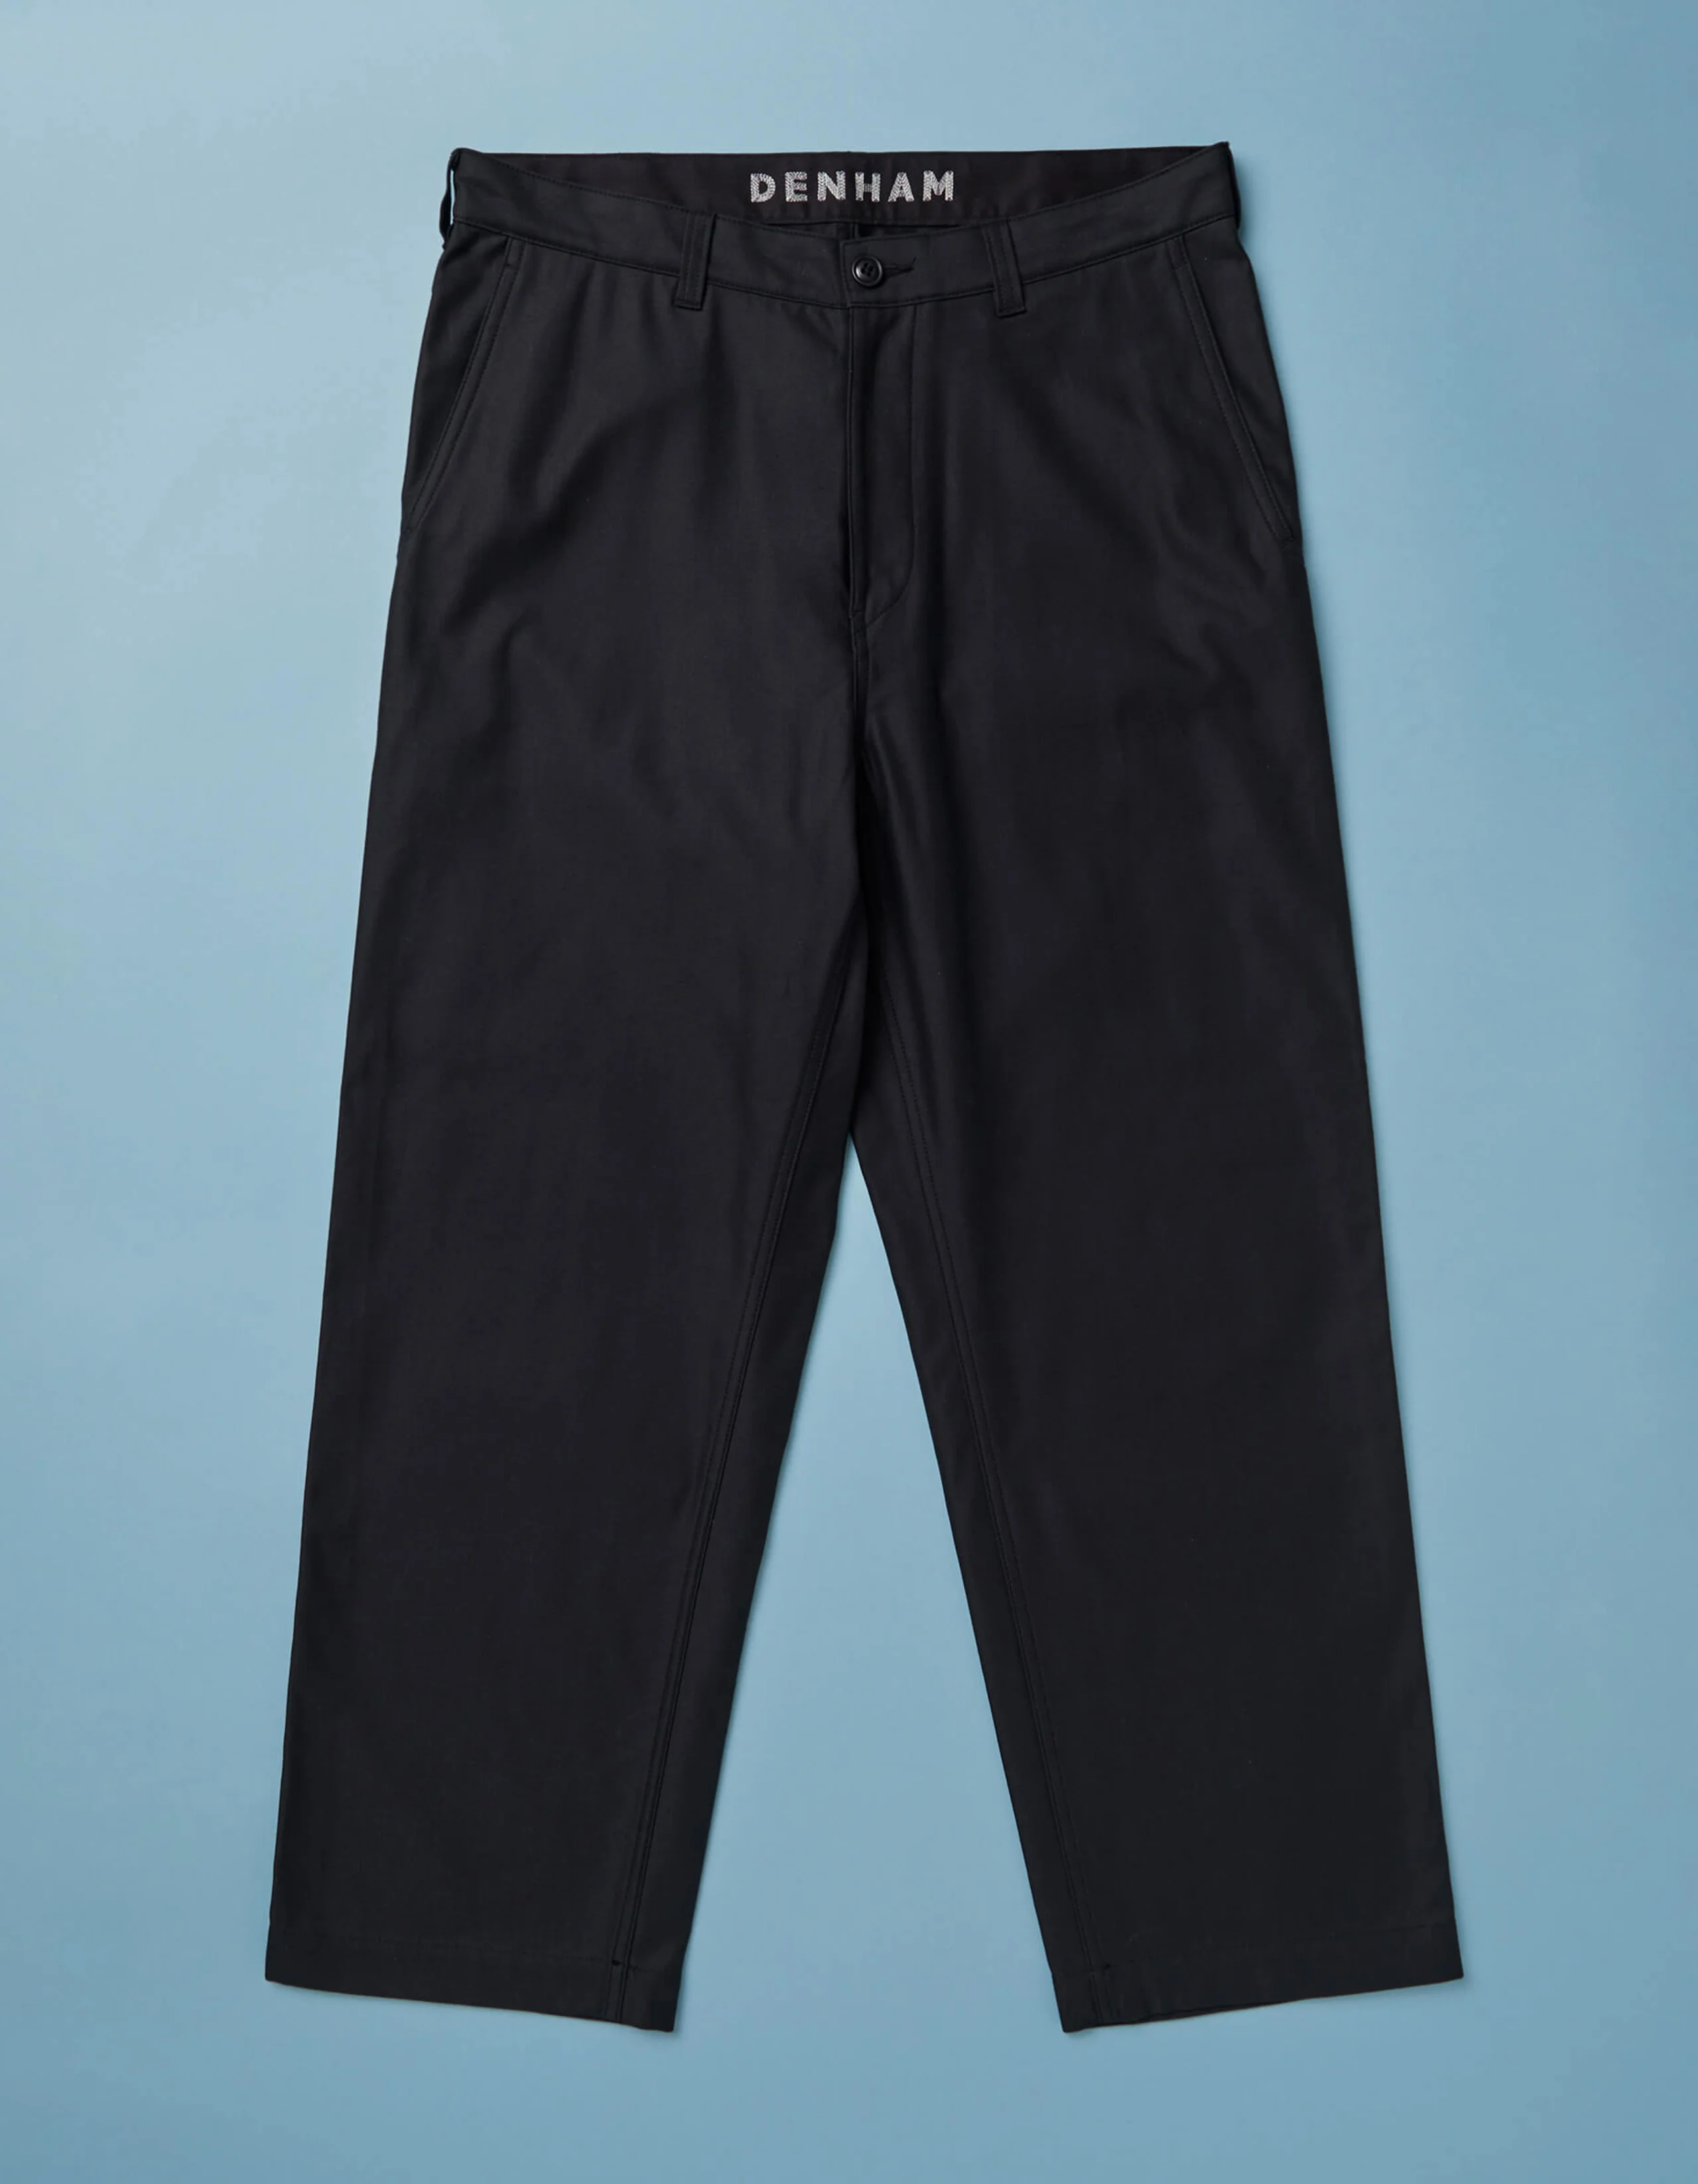 TOKYO WORK PANTS Thick Cotton